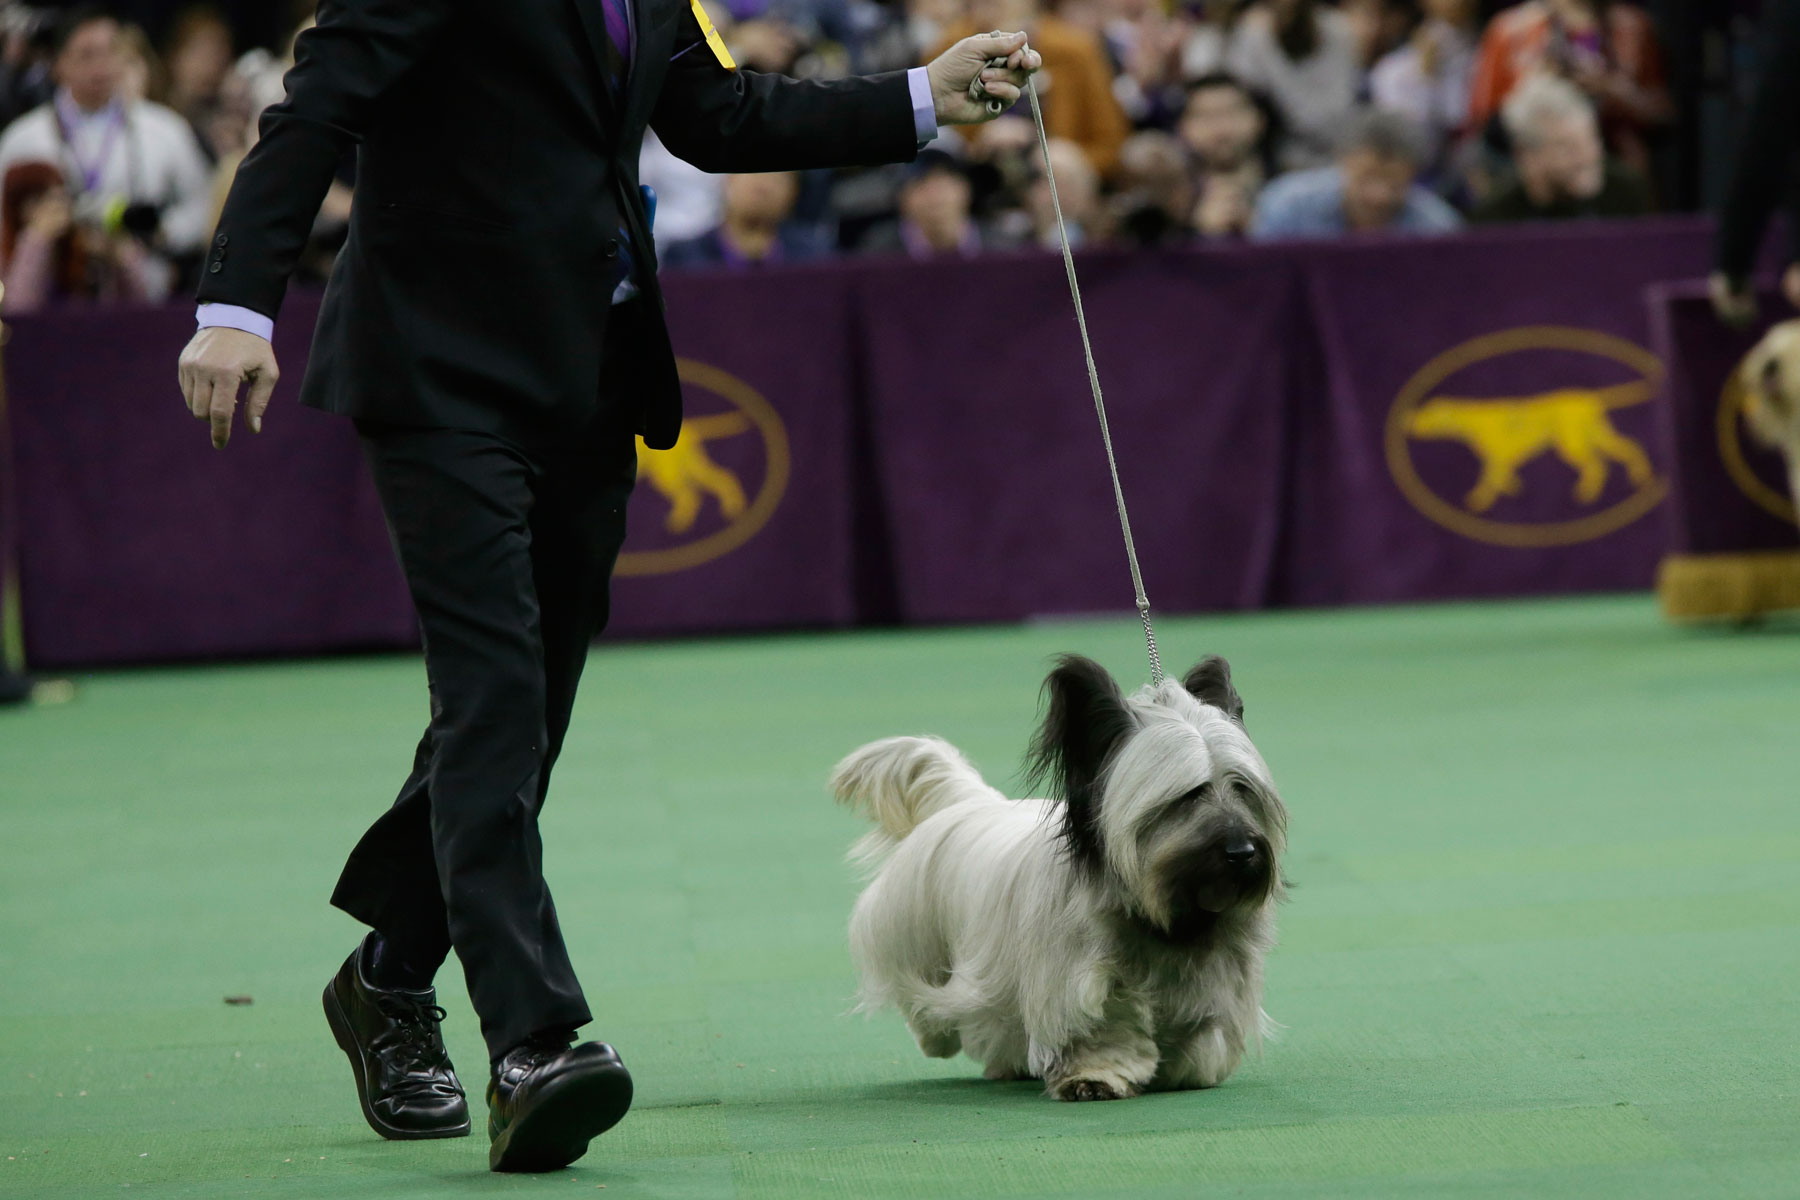 Larry Cornelius shows Charlie, a skye terrier during the terrier group competition at the Westminster Kennel Club dog show, Tuesday, Feb. 17, 2015, at Madison Square Garden in New York. Charlie won the terrier group competition. (AP Photo/Mary Altaffer)